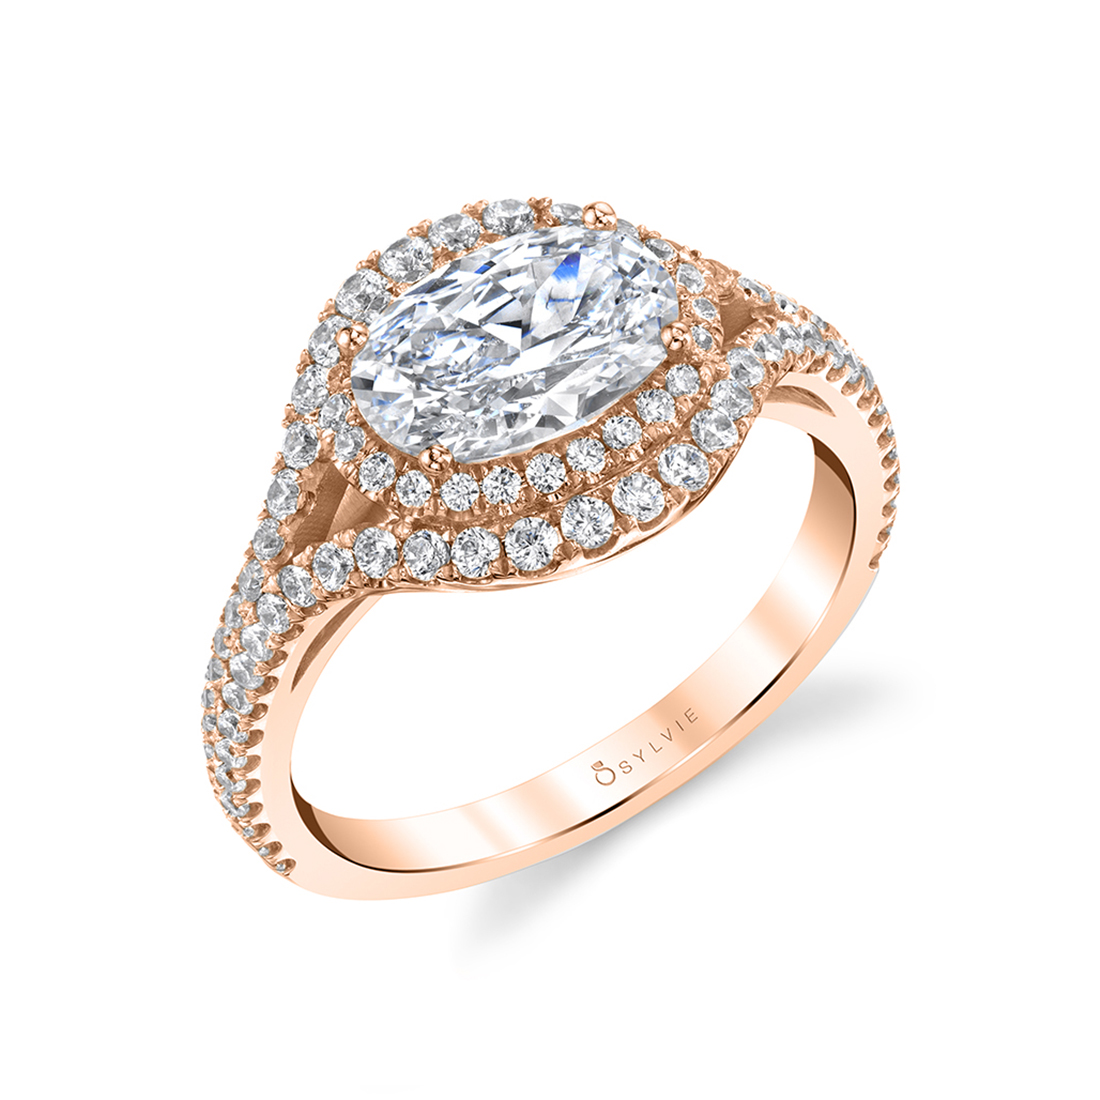 Oval Diamond Ring with Halo in Rose Gold - Eleanora